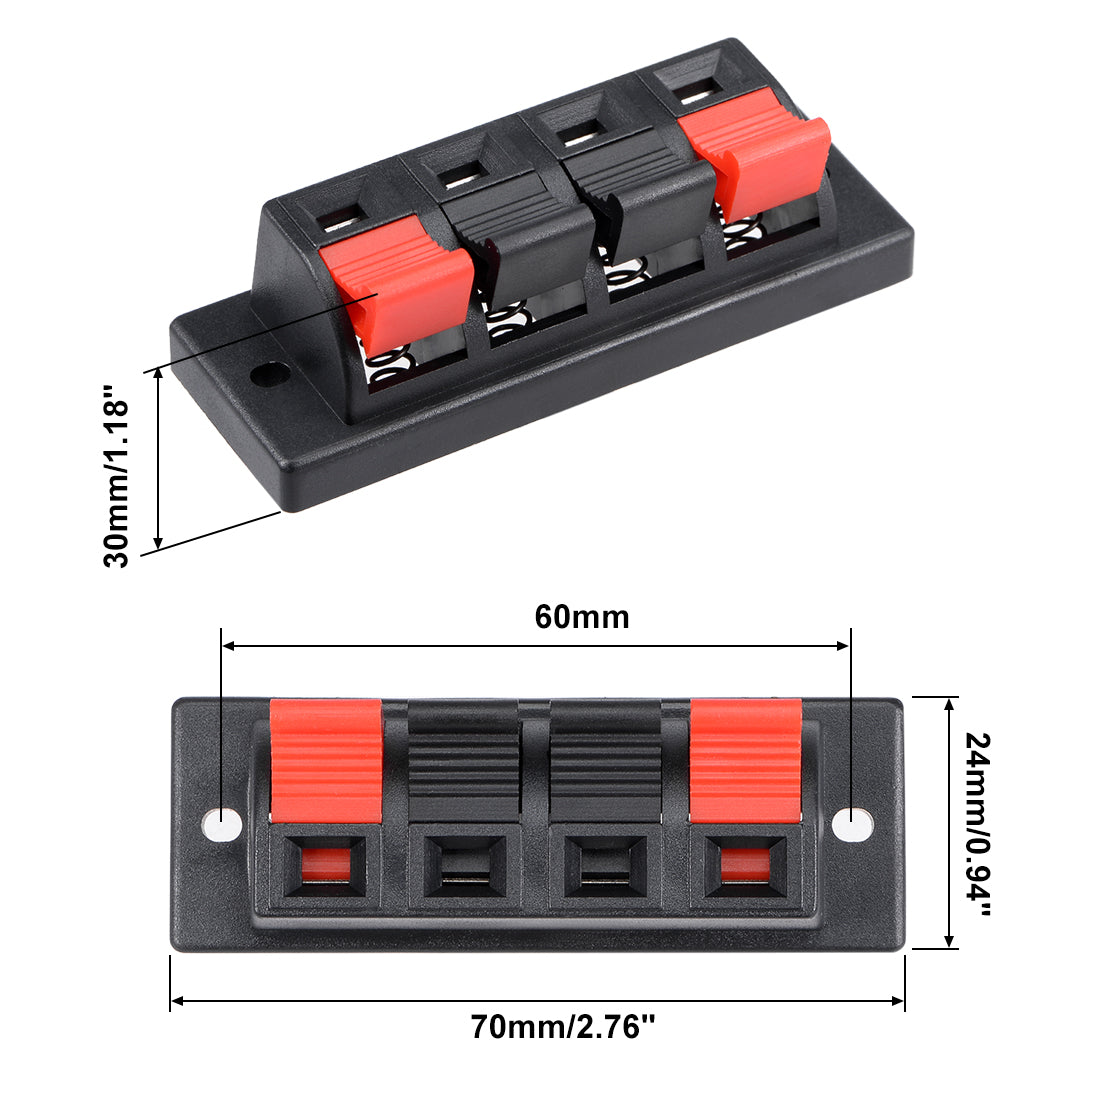 uxcell Uxcell 3pcs 4 Way Jack Socket Spring Push Release Connector Speaker Terminal Strip Block